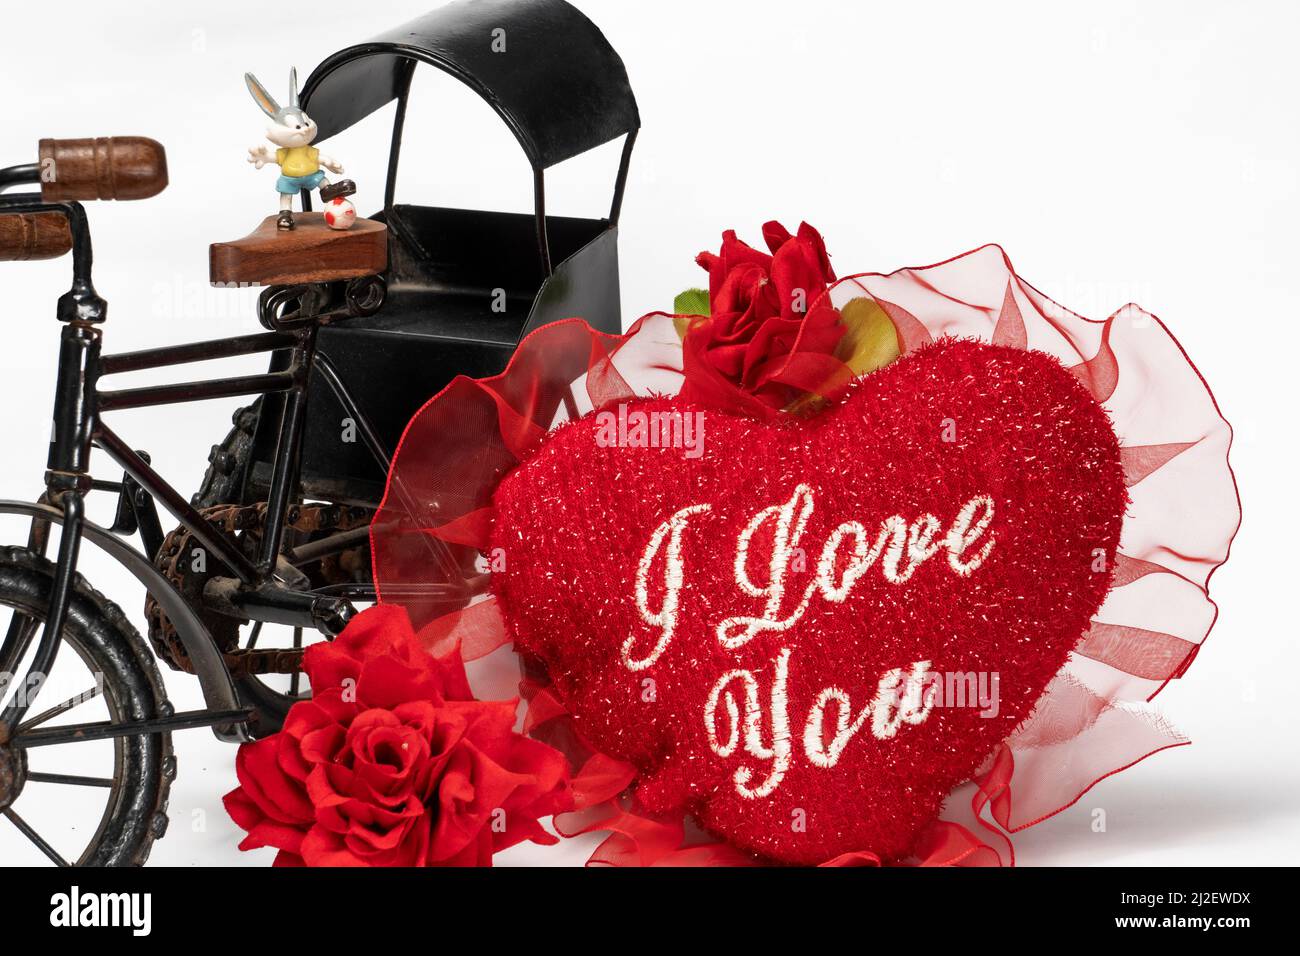 Sur tricycle Siège lapin avec football, coeur dans I Love You Text, Red Ross Banque D'Images